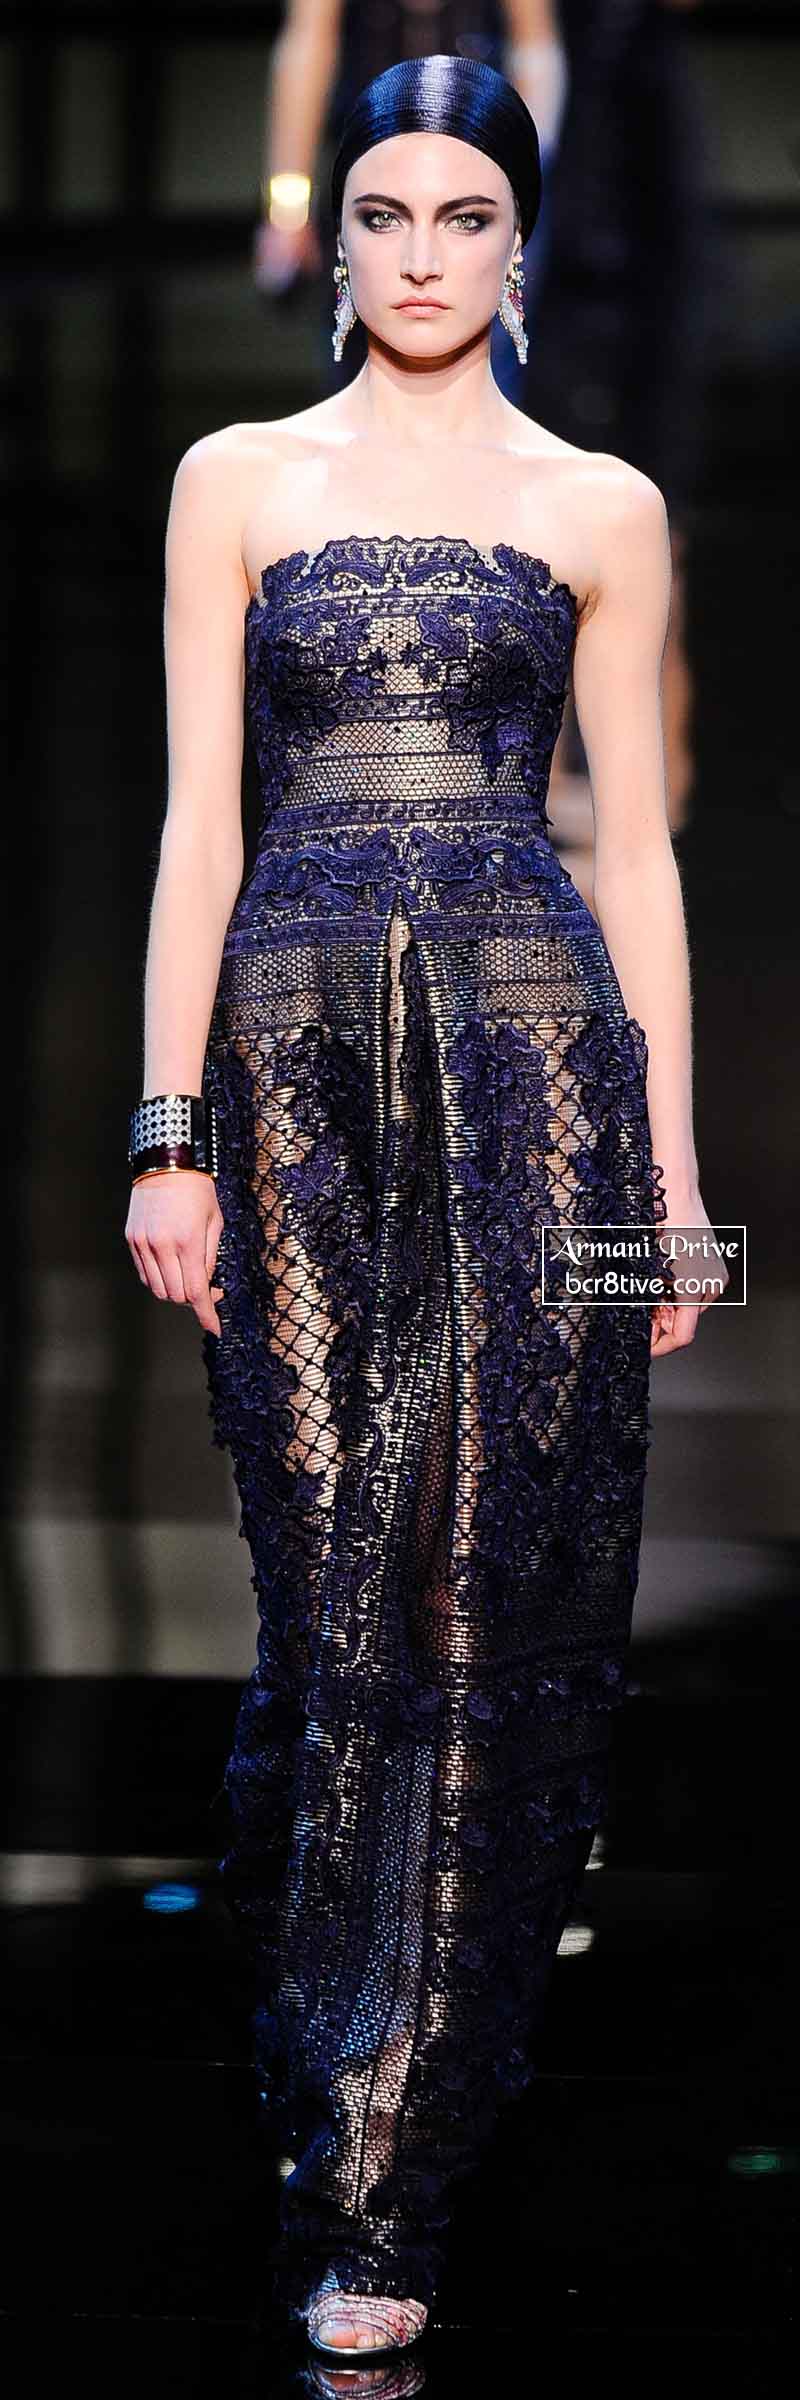 Armani Privé Spring 2014 Couture – Page 2 – Be Creative